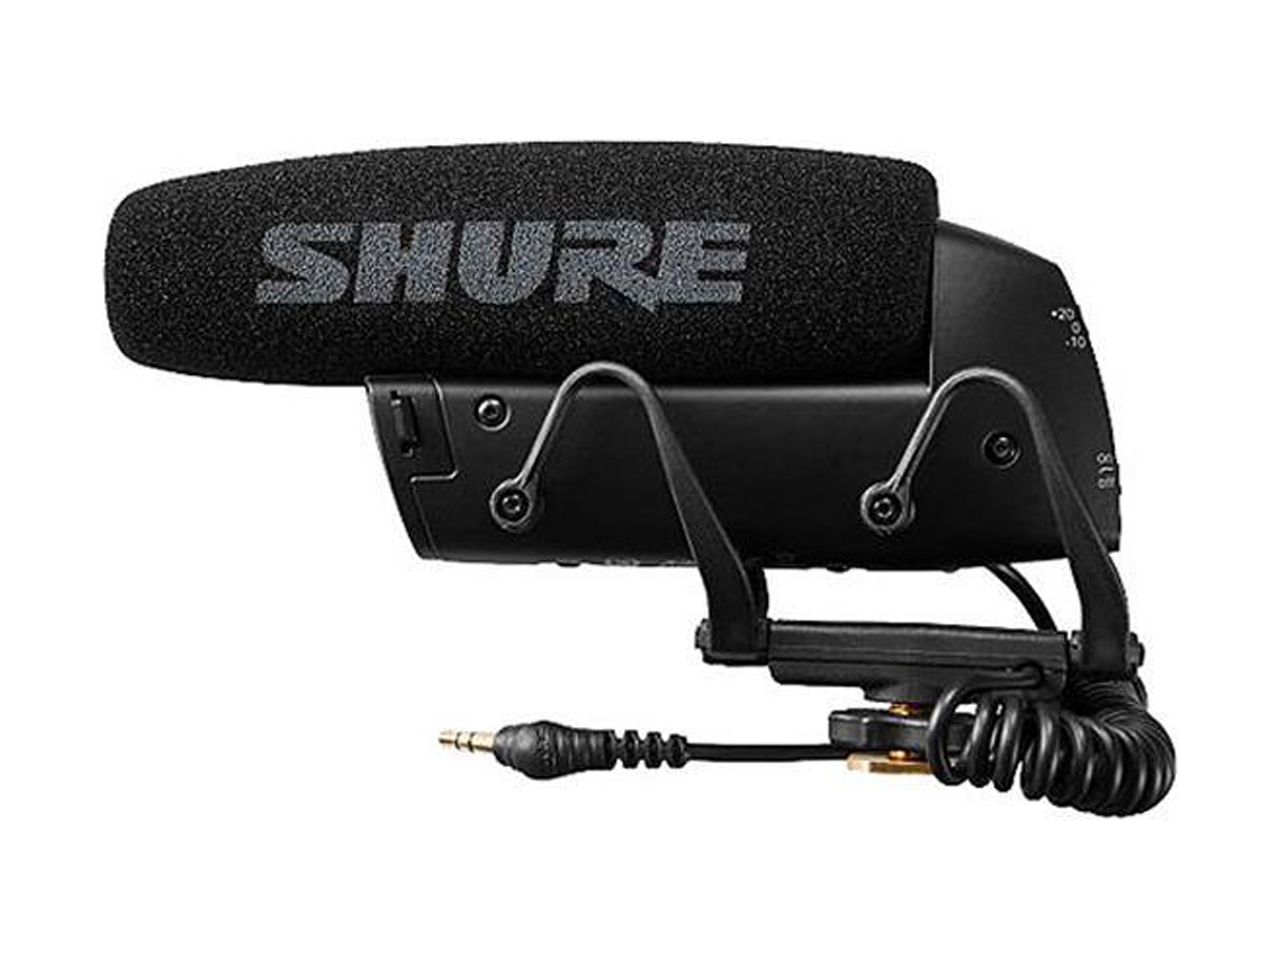 Shure VP83 LensHopper Camera-Mounted Condenser Microphone for Use with DSLR Cameras and HD Camcorders - image 3 of 14